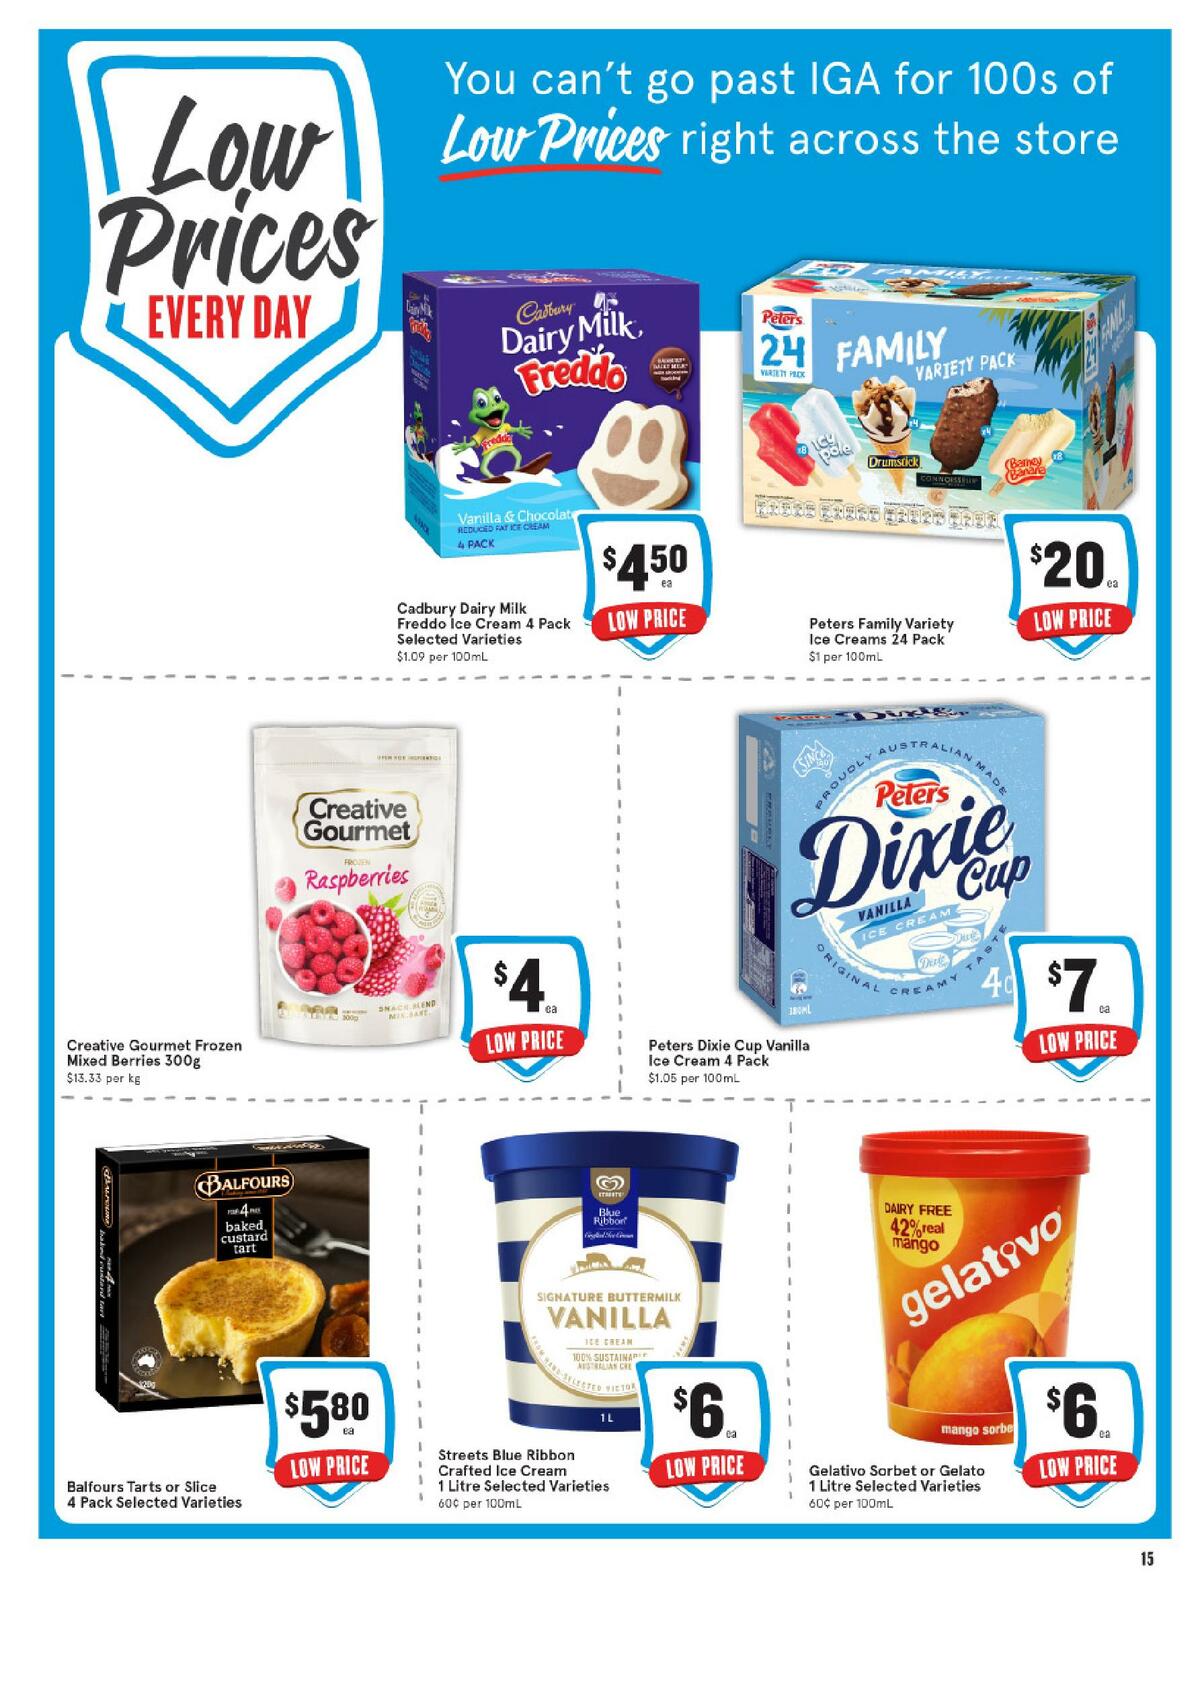 IGA Low Prices Every Day Catalogues from 24 February